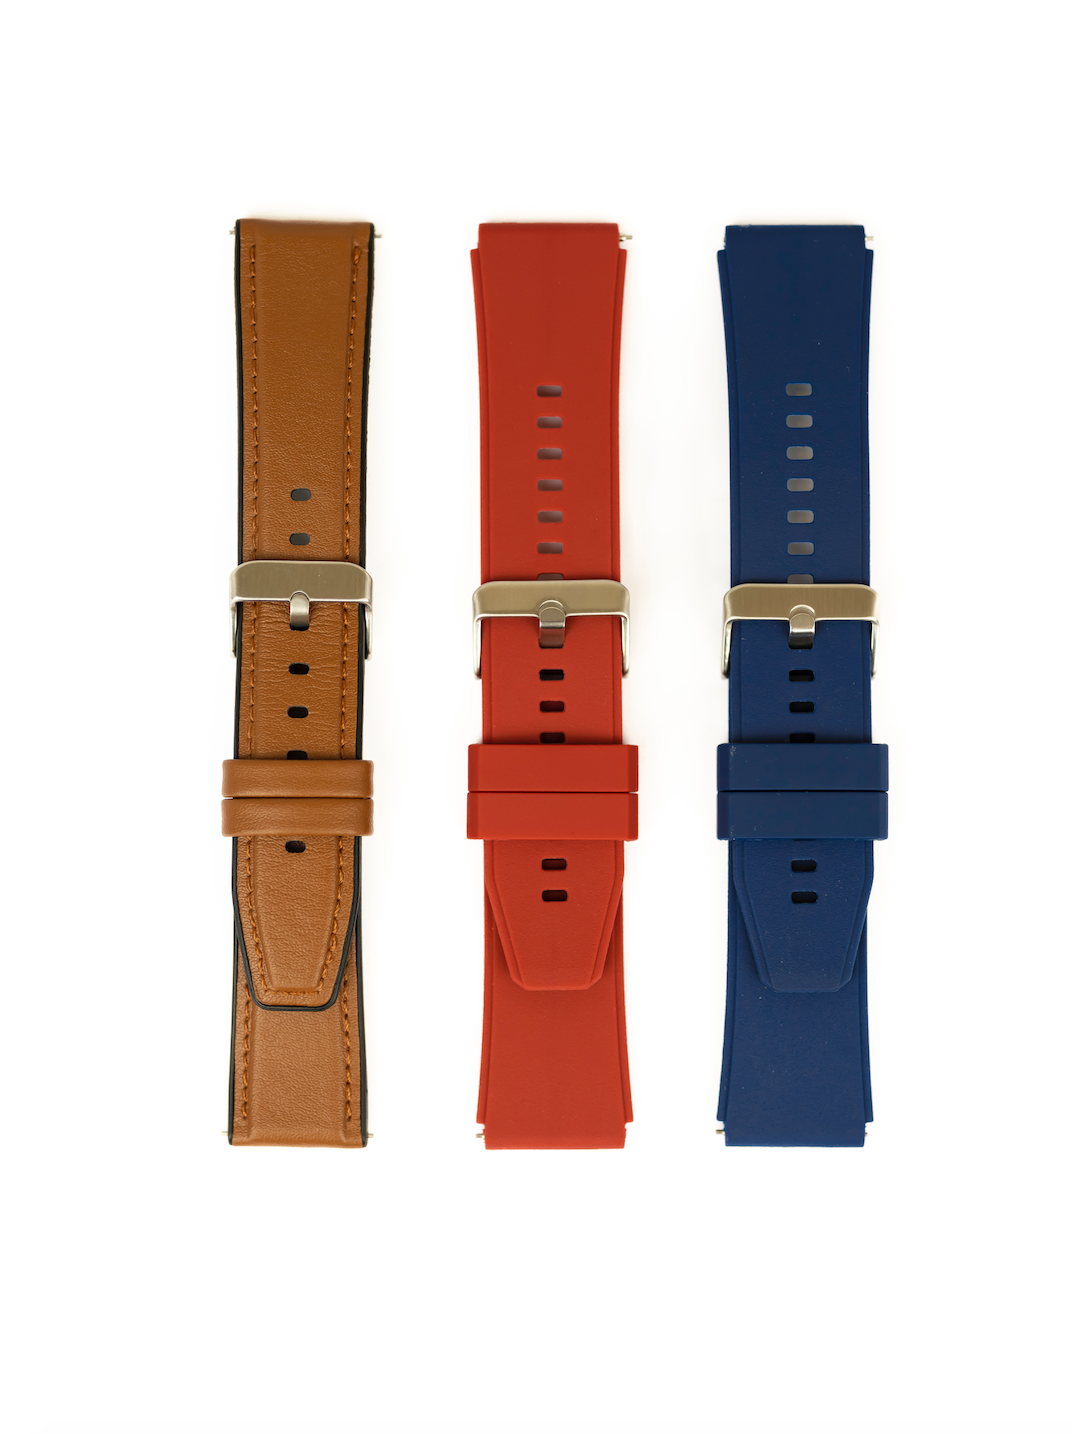 Additional Leather Wearable Strap